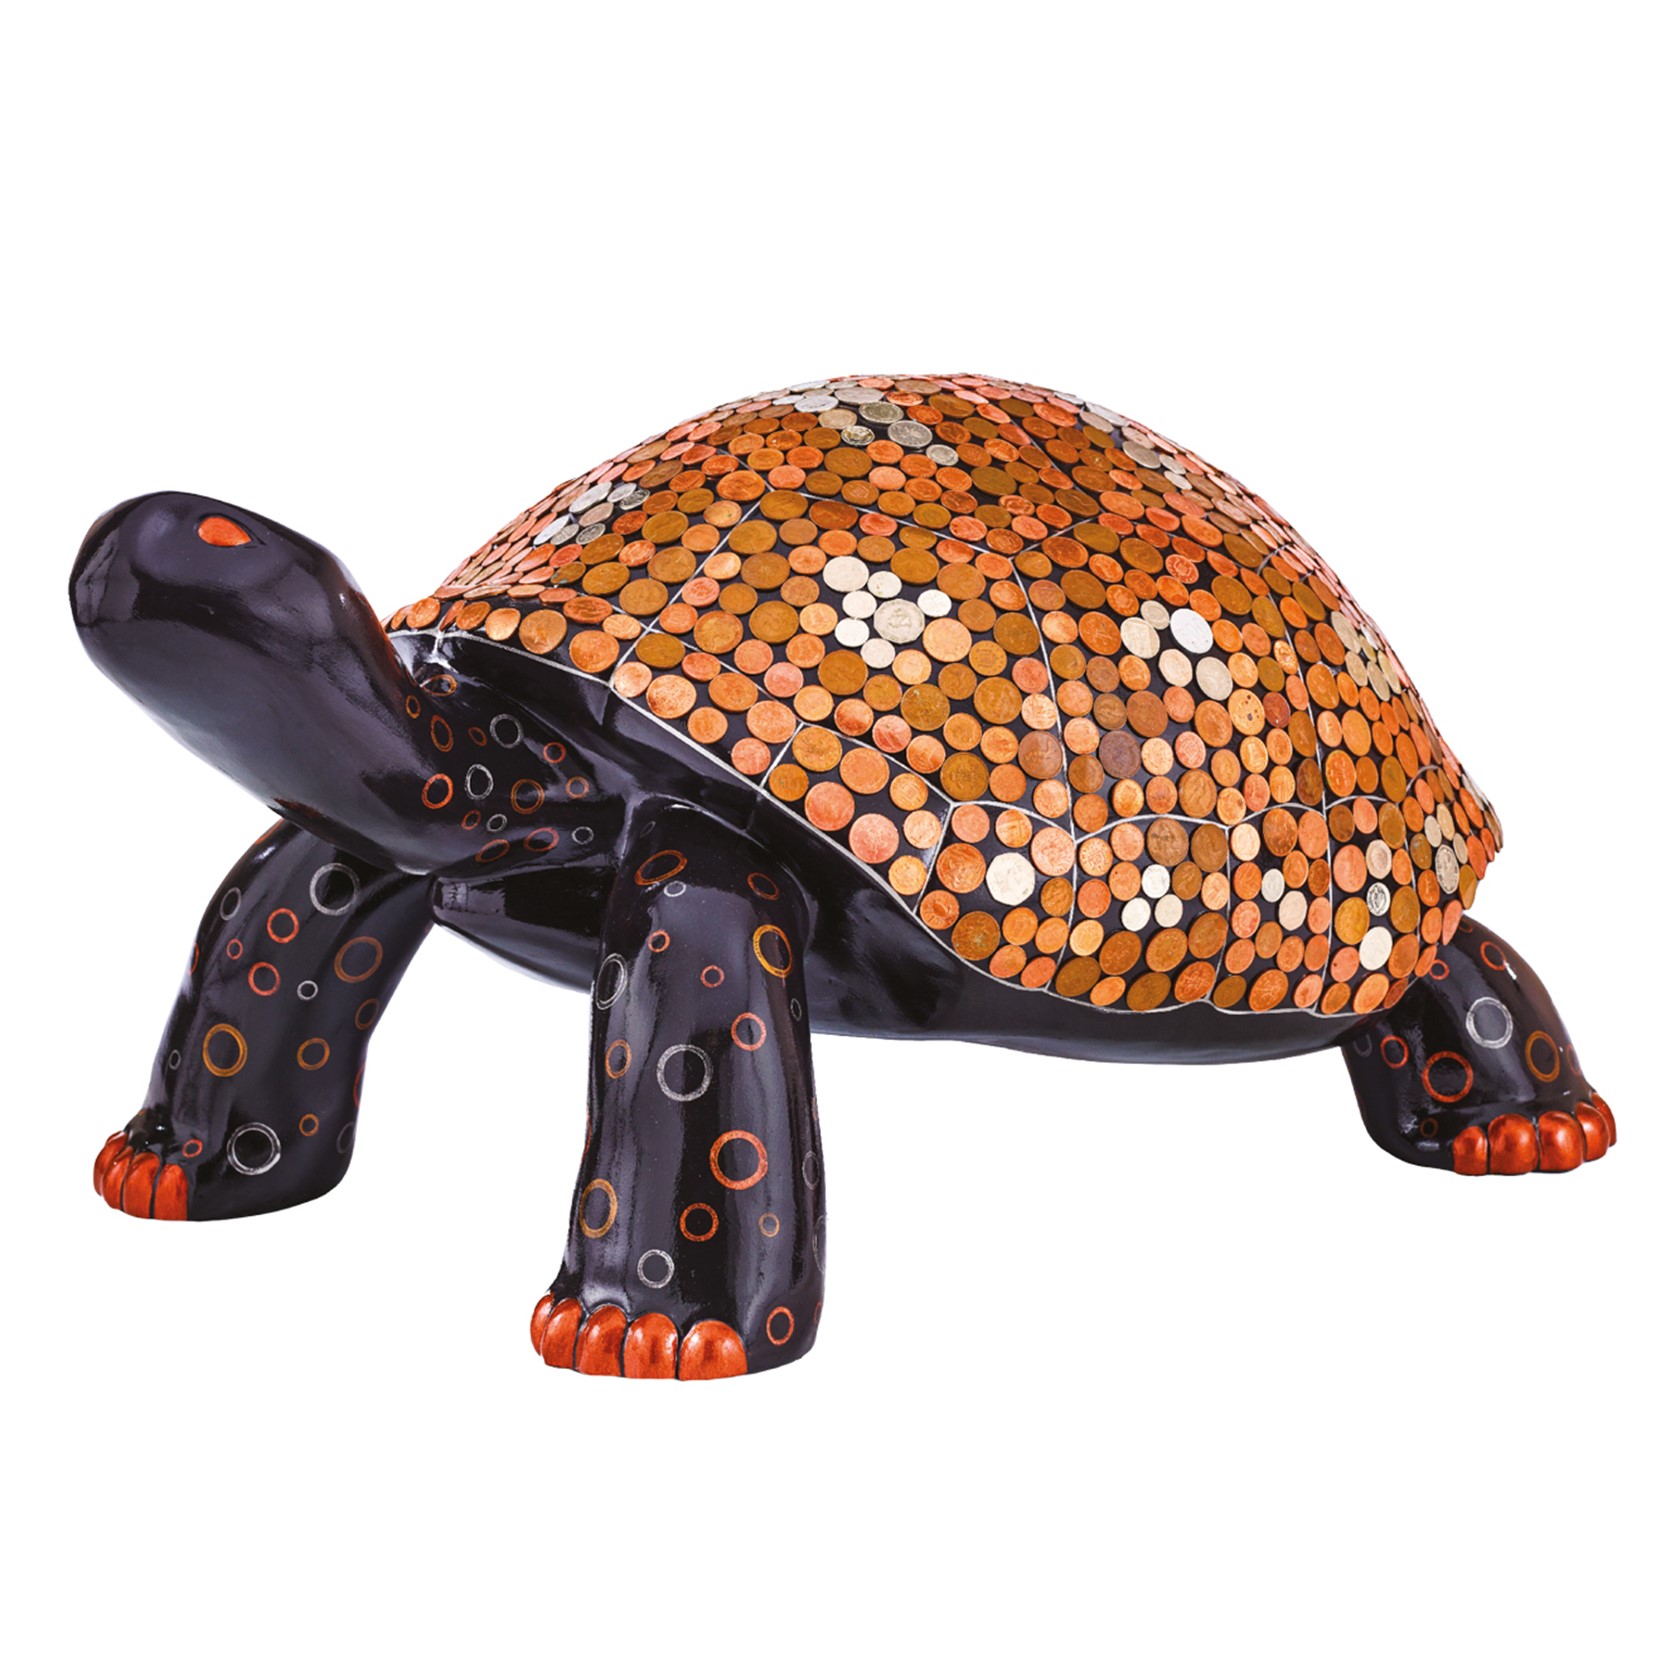 Tt Small 1333X1333 Penny For Your Tortoise